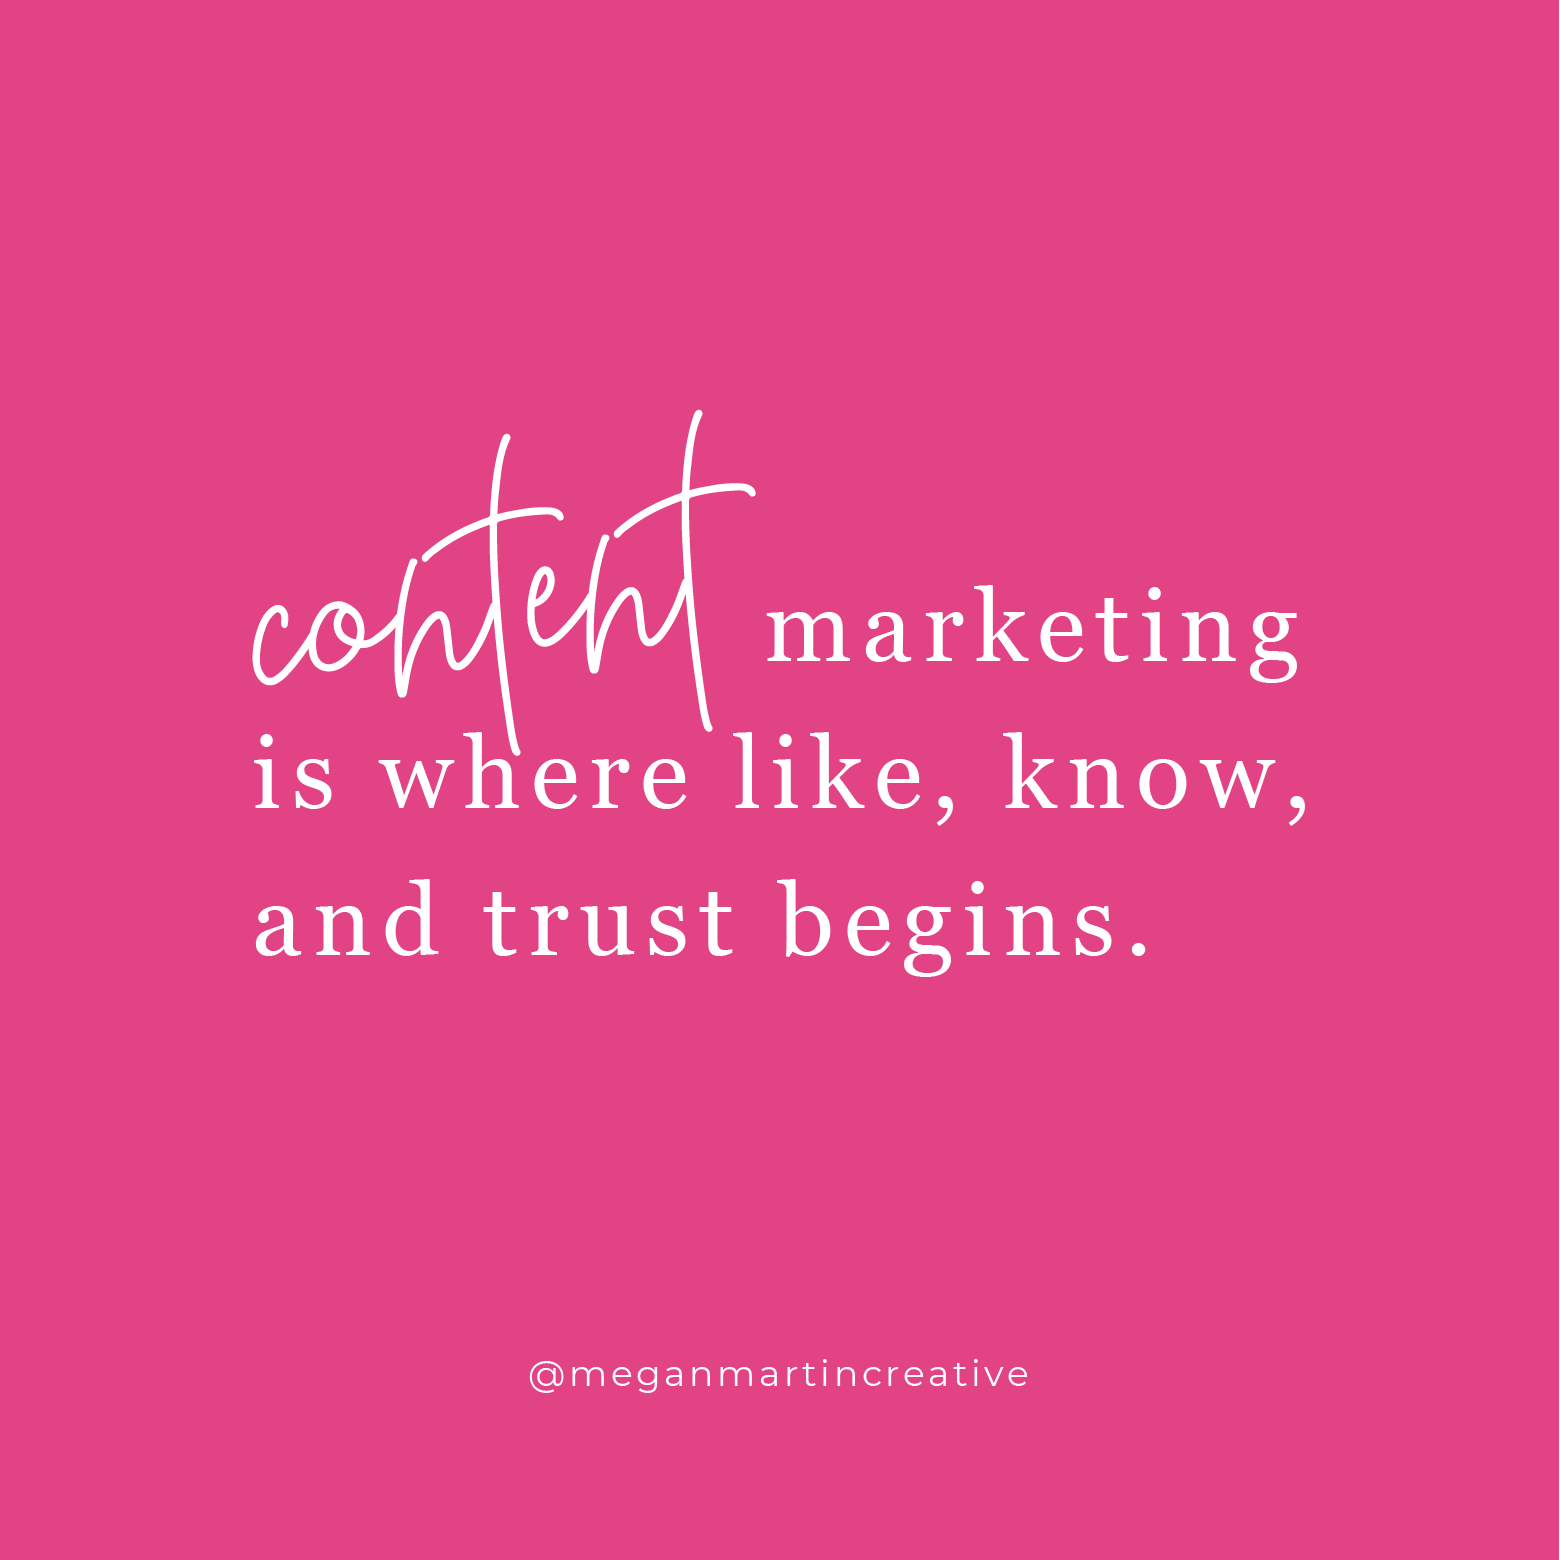 Content marketing is where like, know, and trust begins.